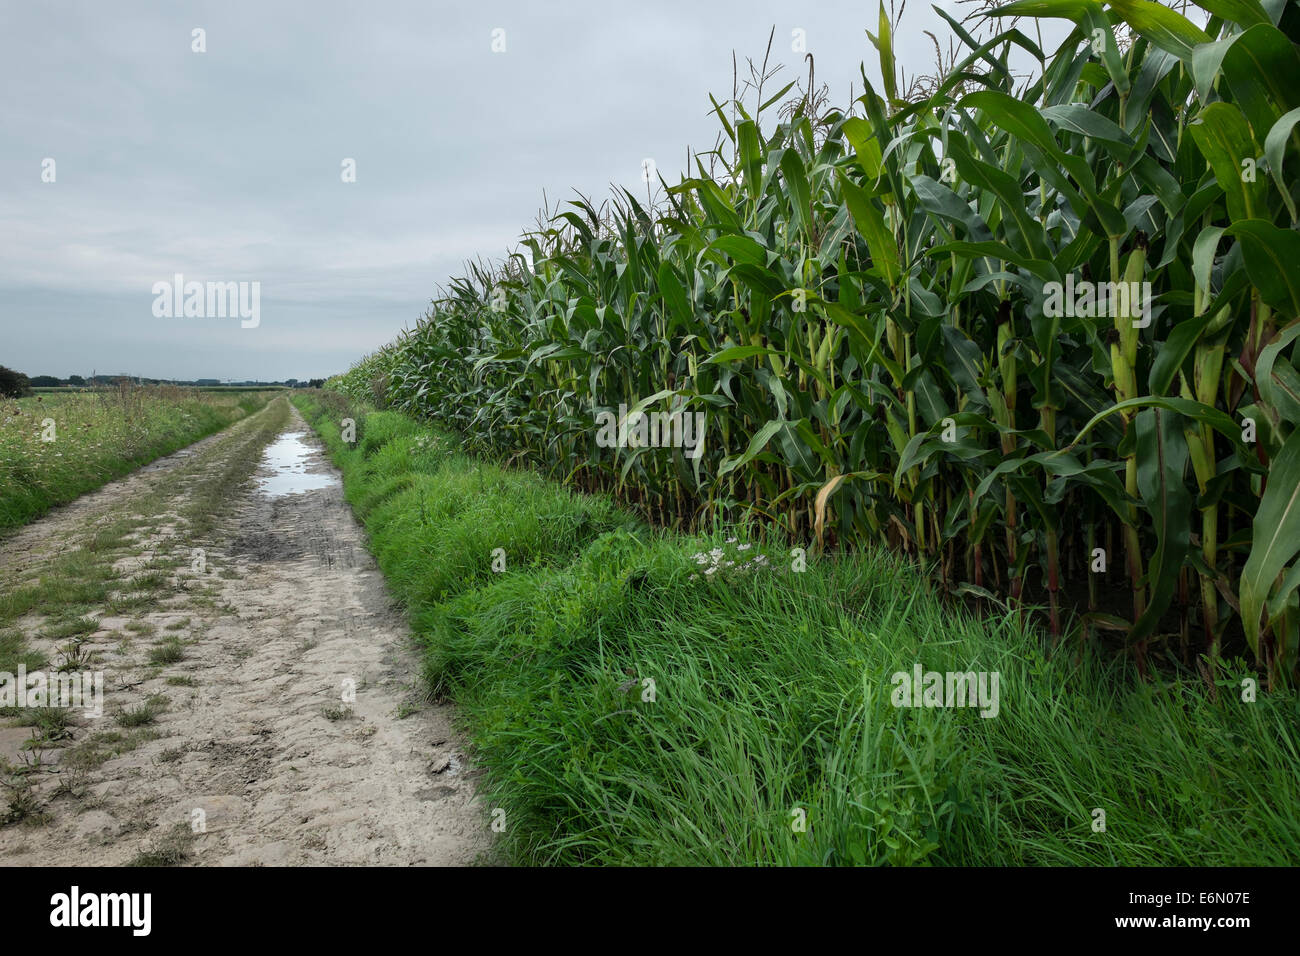 General view of corn close to reaching harvest time Stock Photo